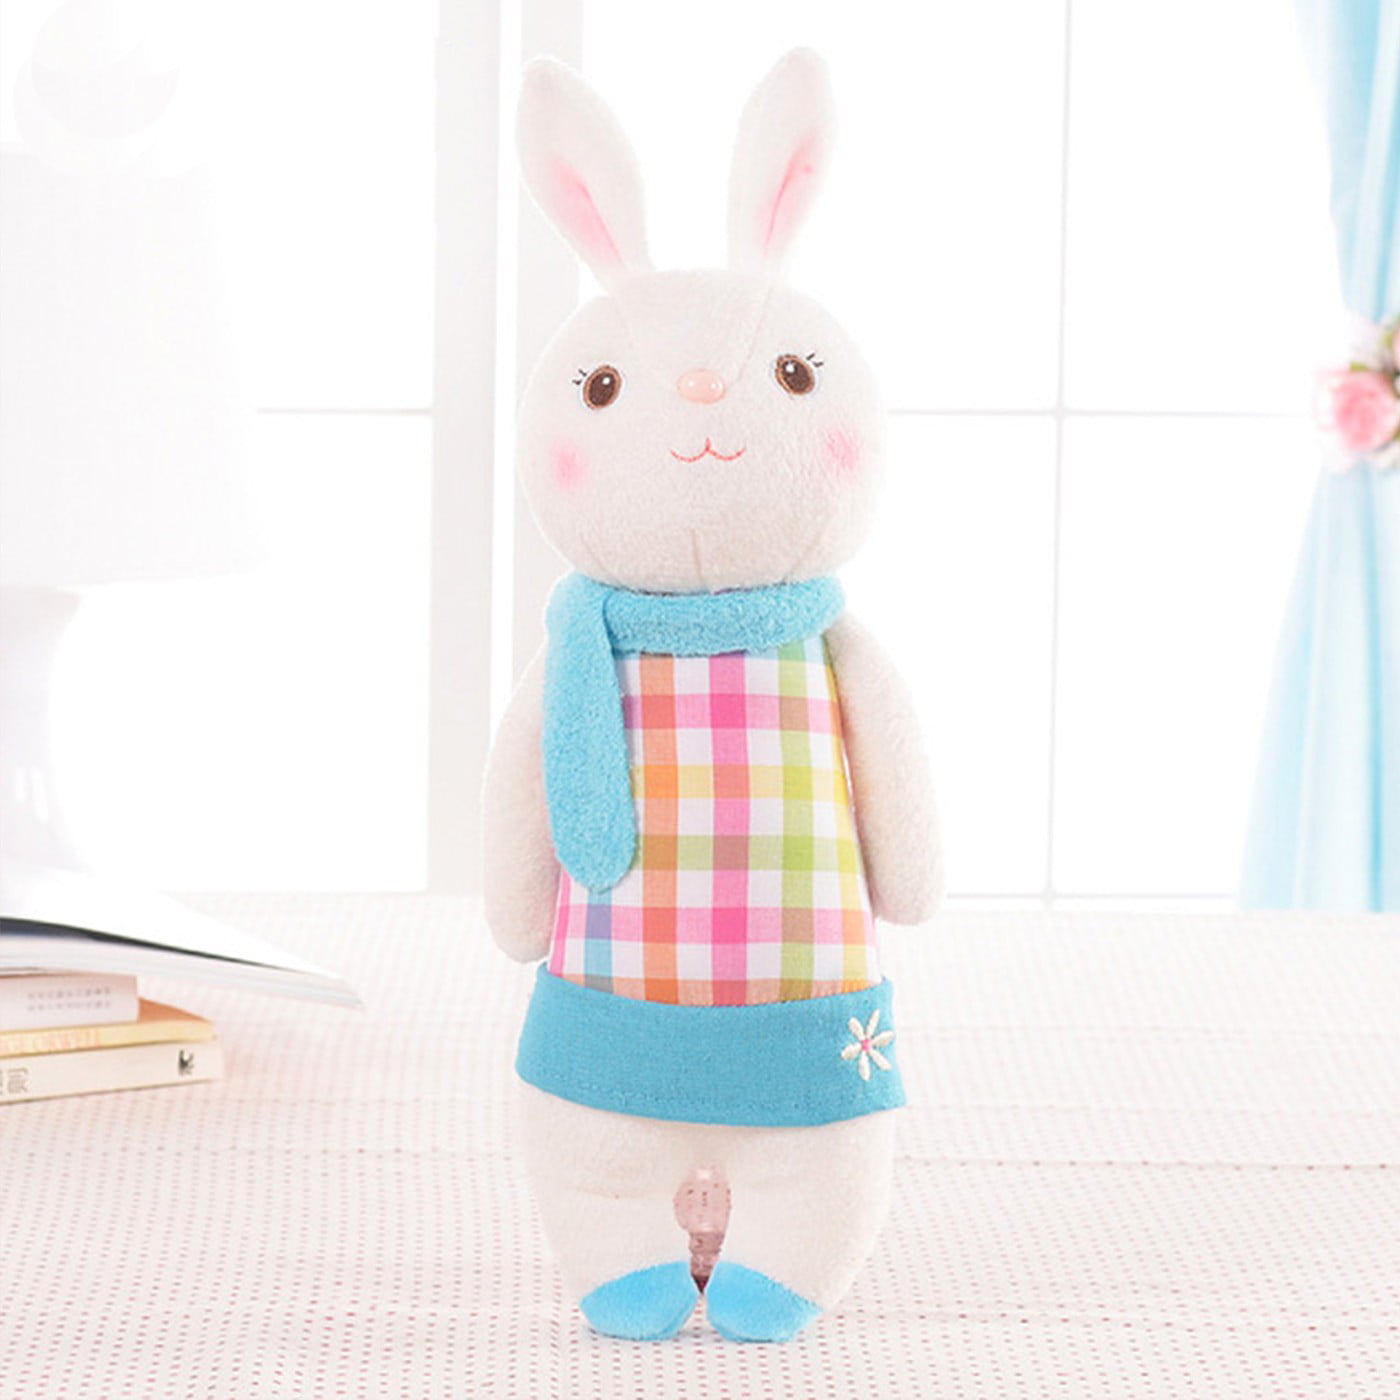 Soft lace dress rabbit stuffed plush animal bunny toy for baby girl kid gift~toy